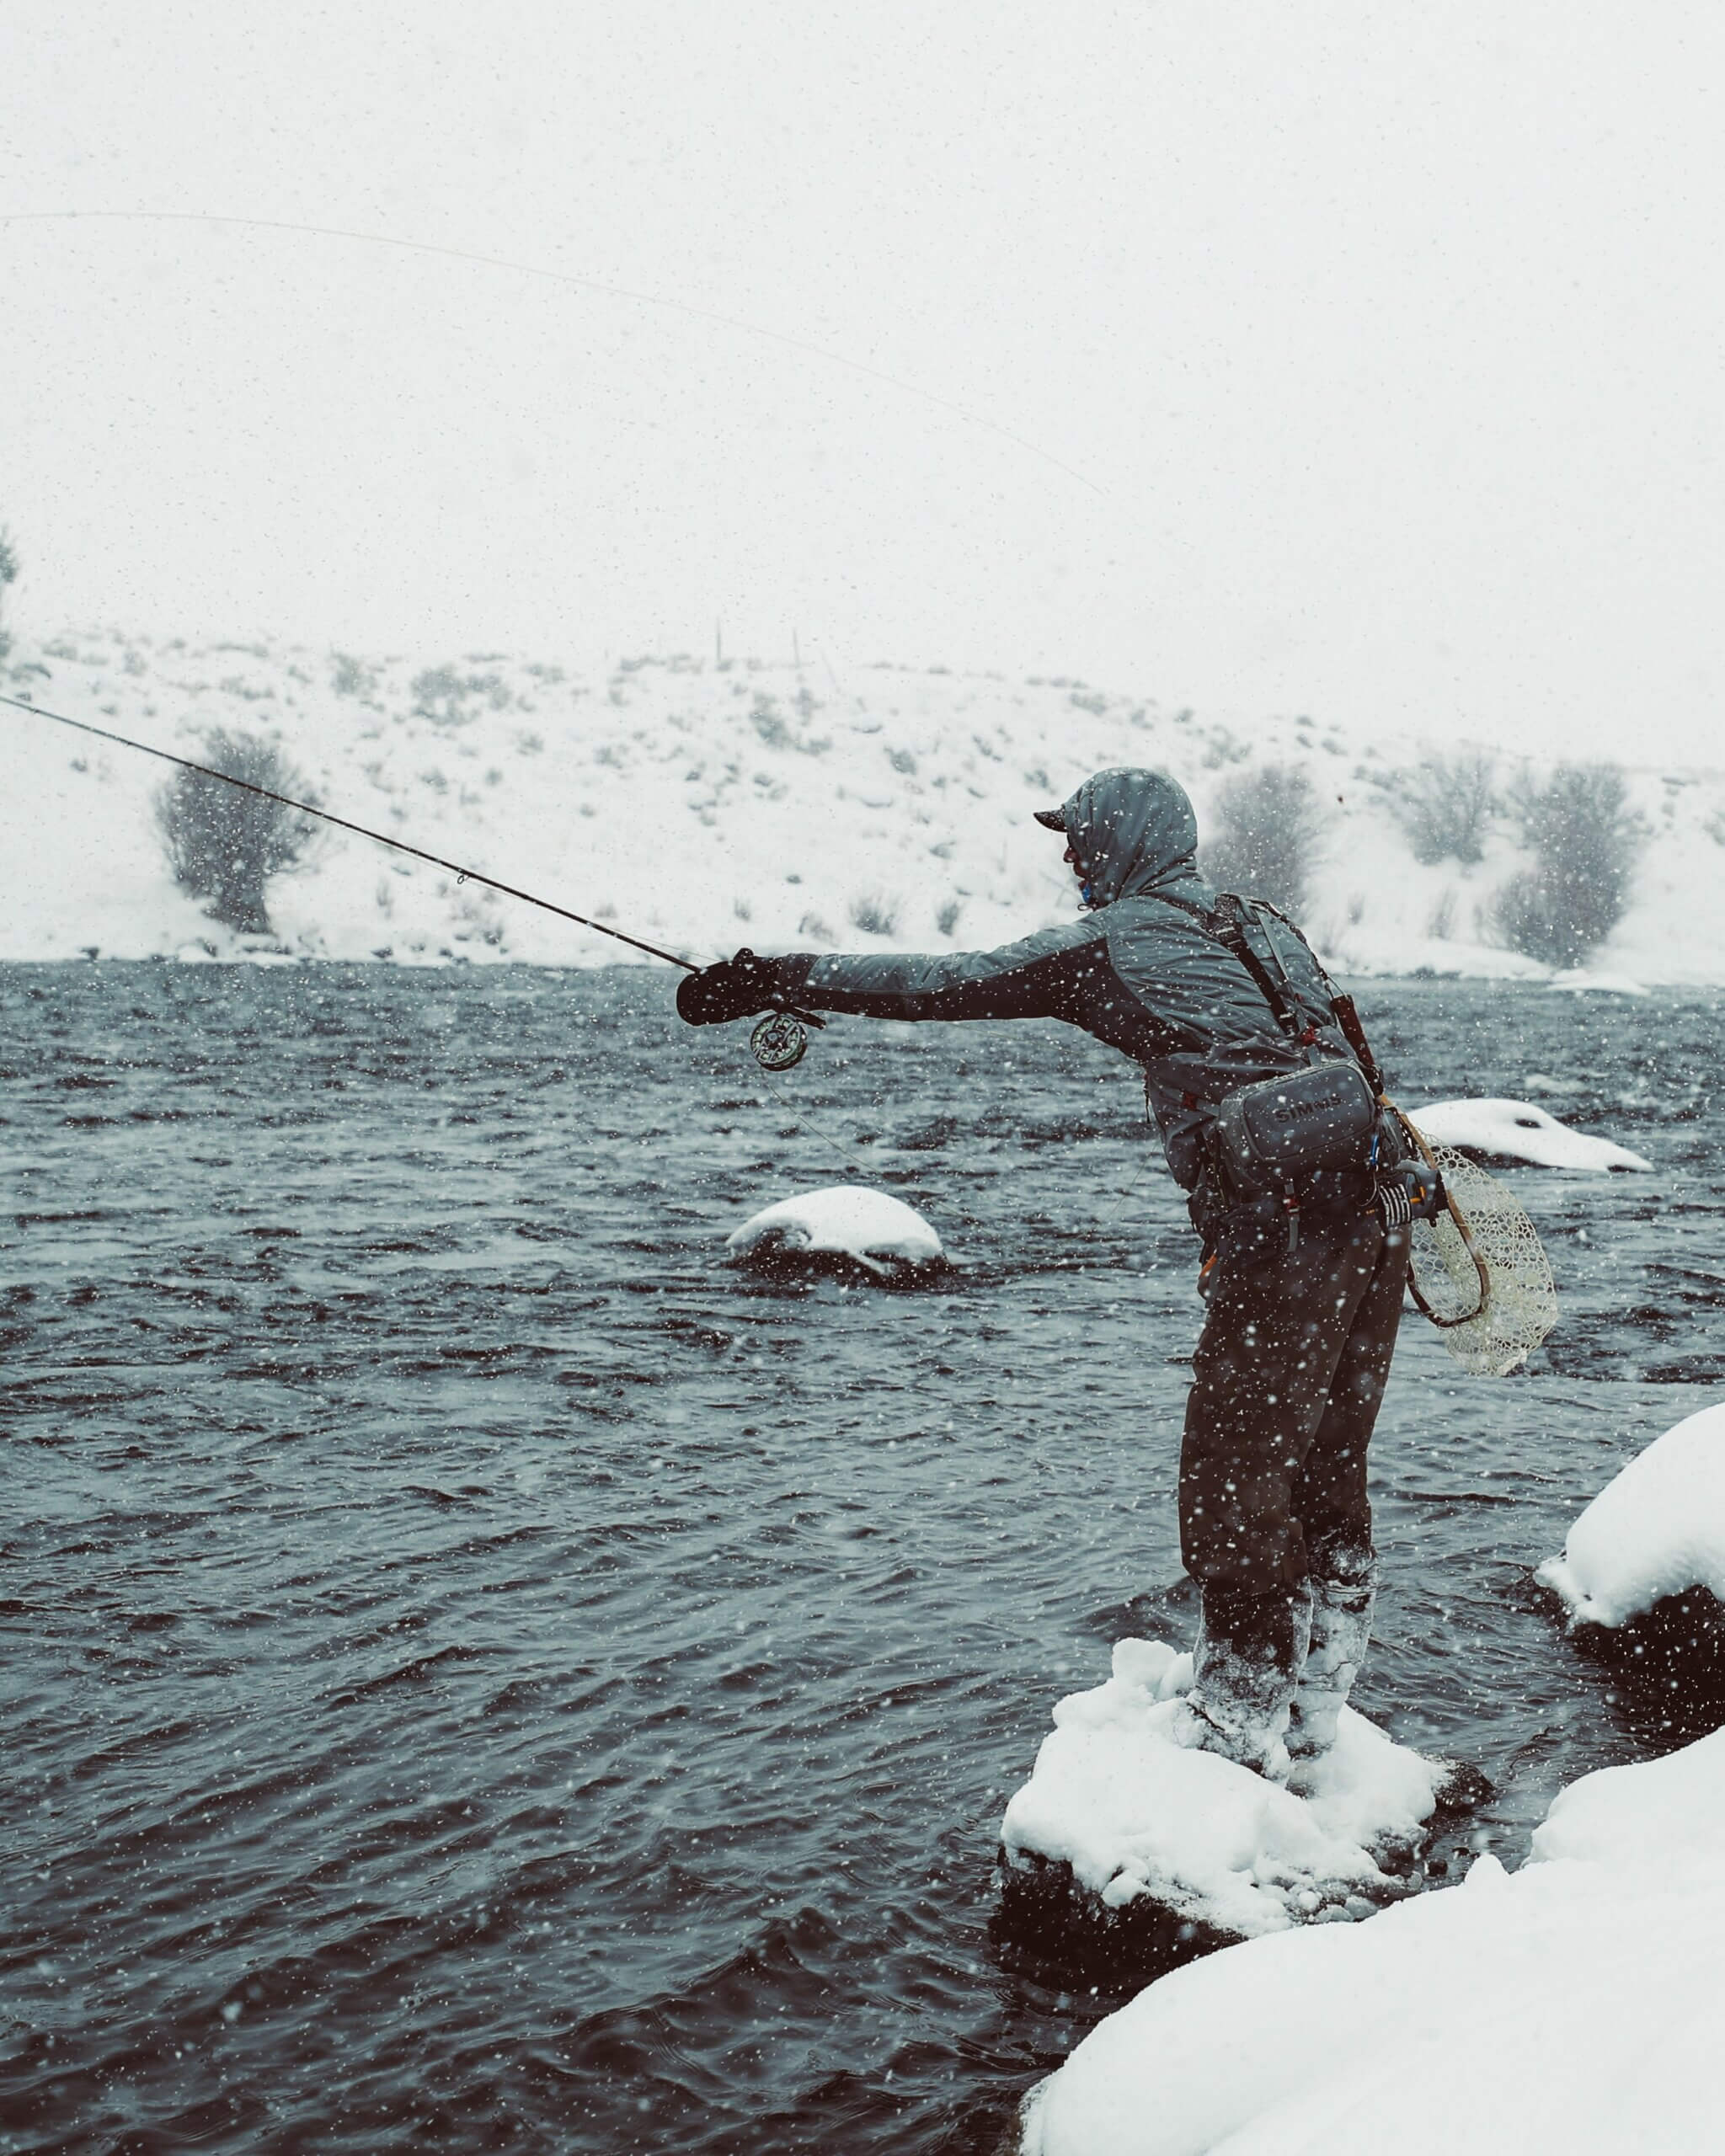 Man fly fishing in snowy conditions